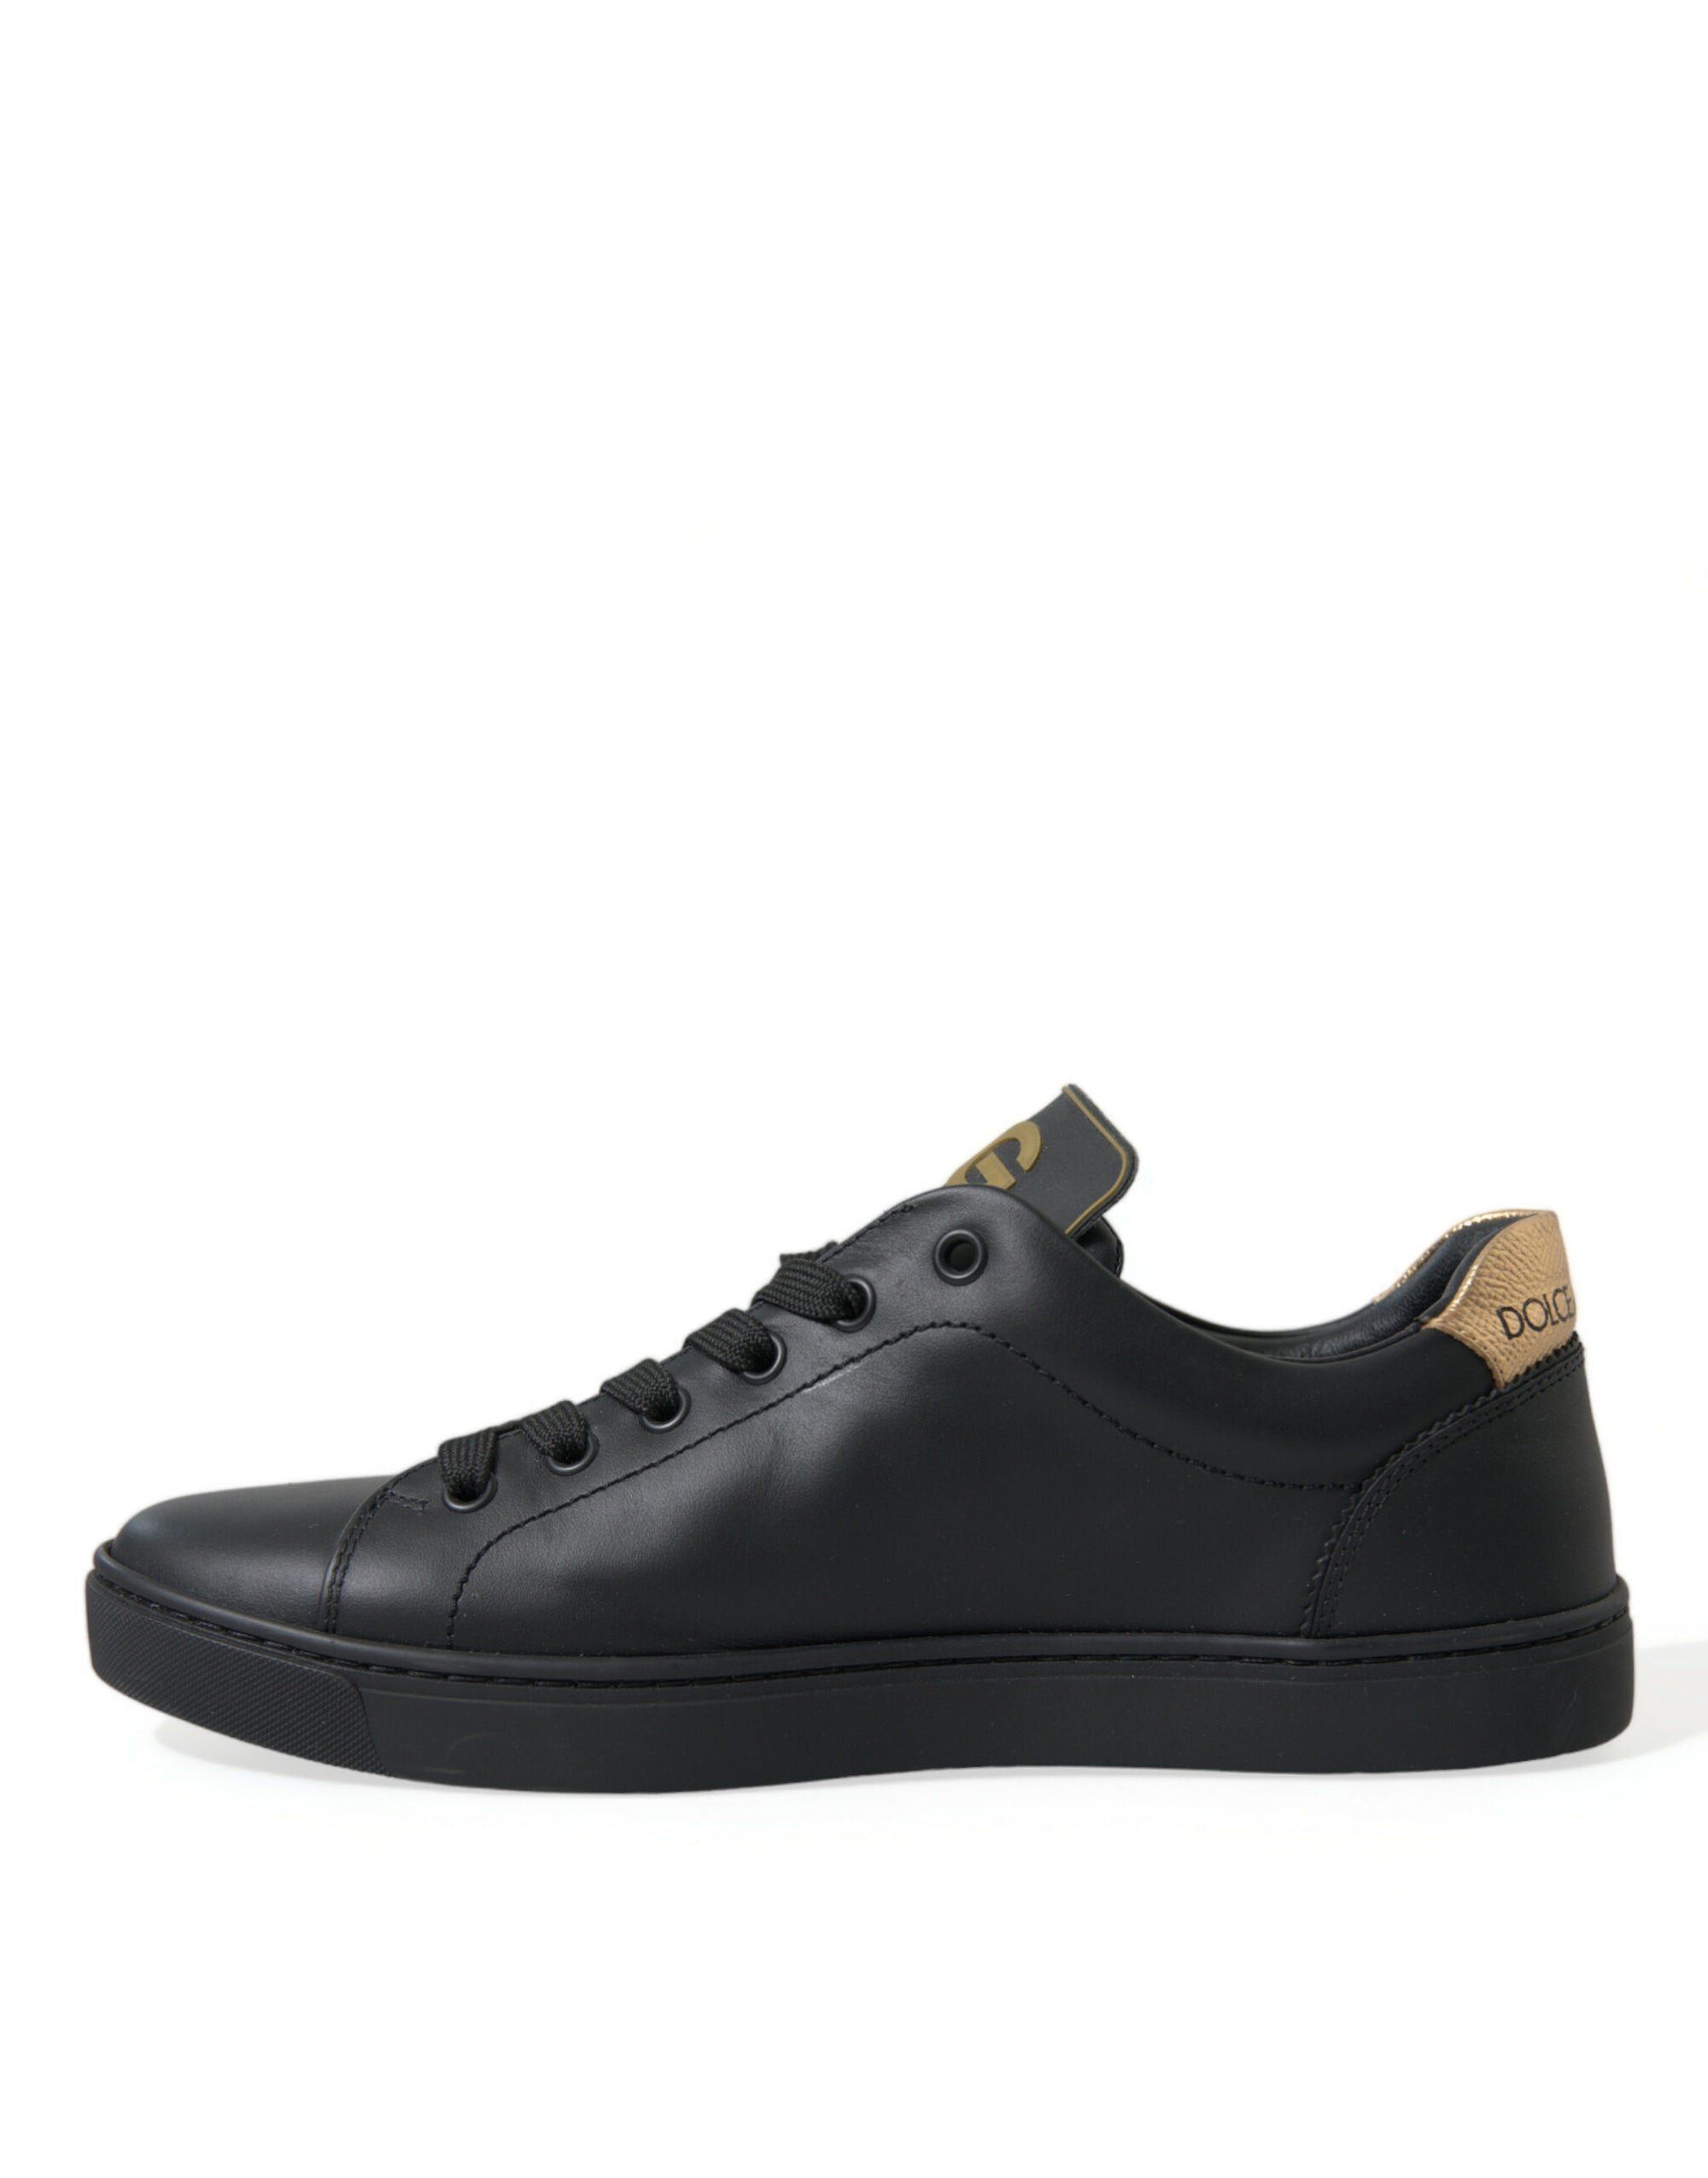 Elegant Black and Gold Leather Sneakers